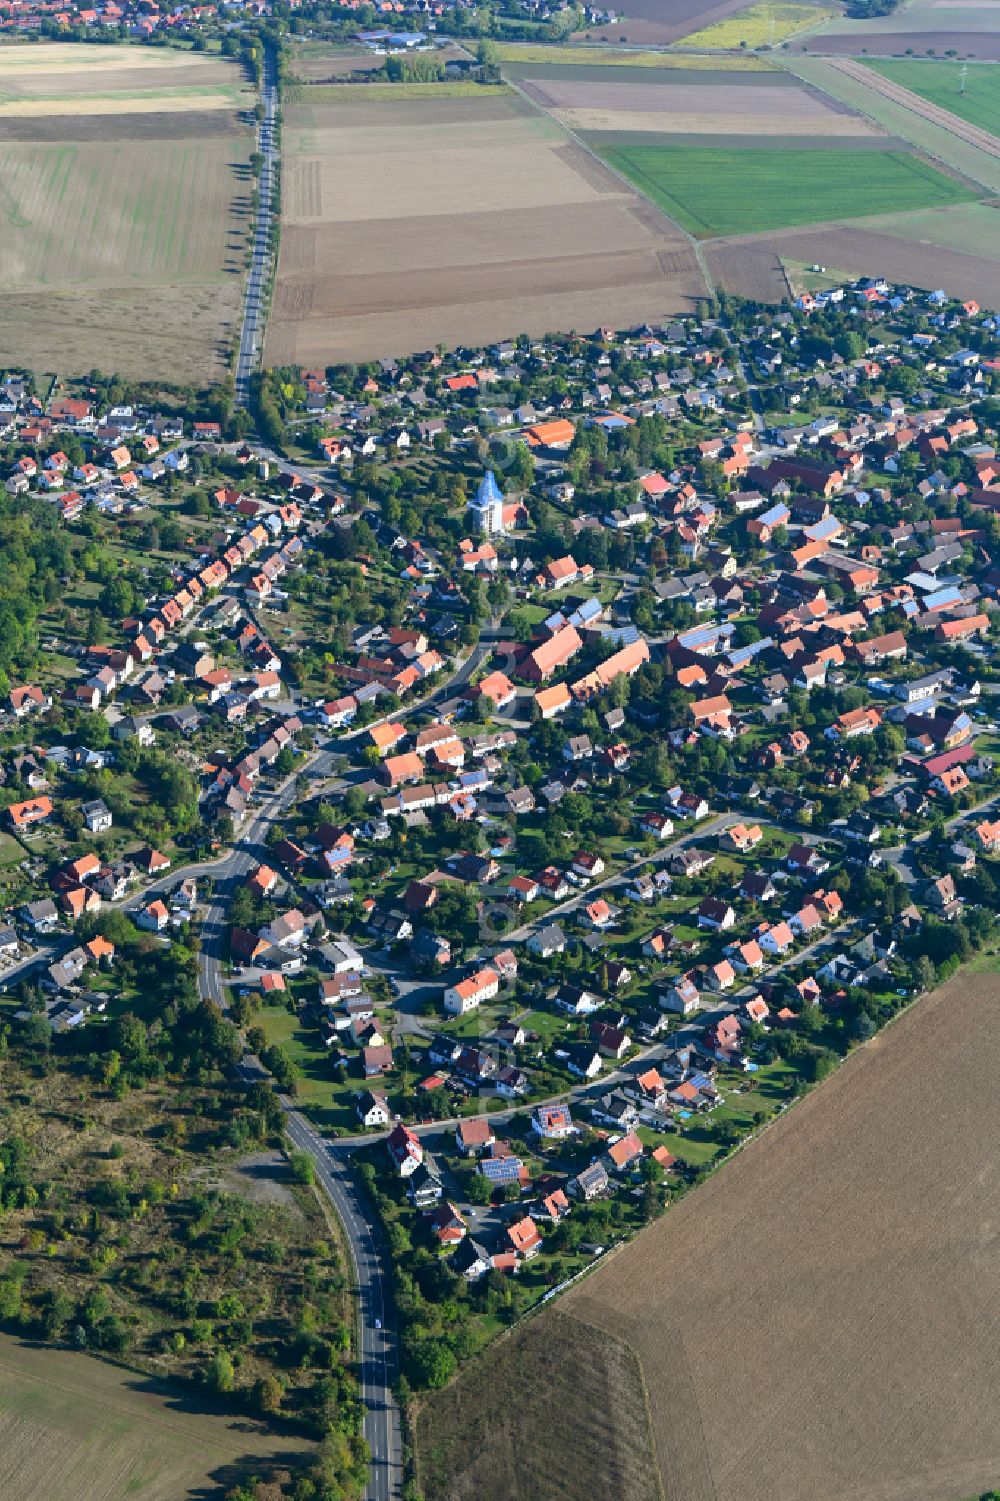 Immenrode from the bird's eye view: Urban area with outskirts and inner city area on the edge of agricultural fields and arable land in Immenrode in the state Lower Saxony, Germany